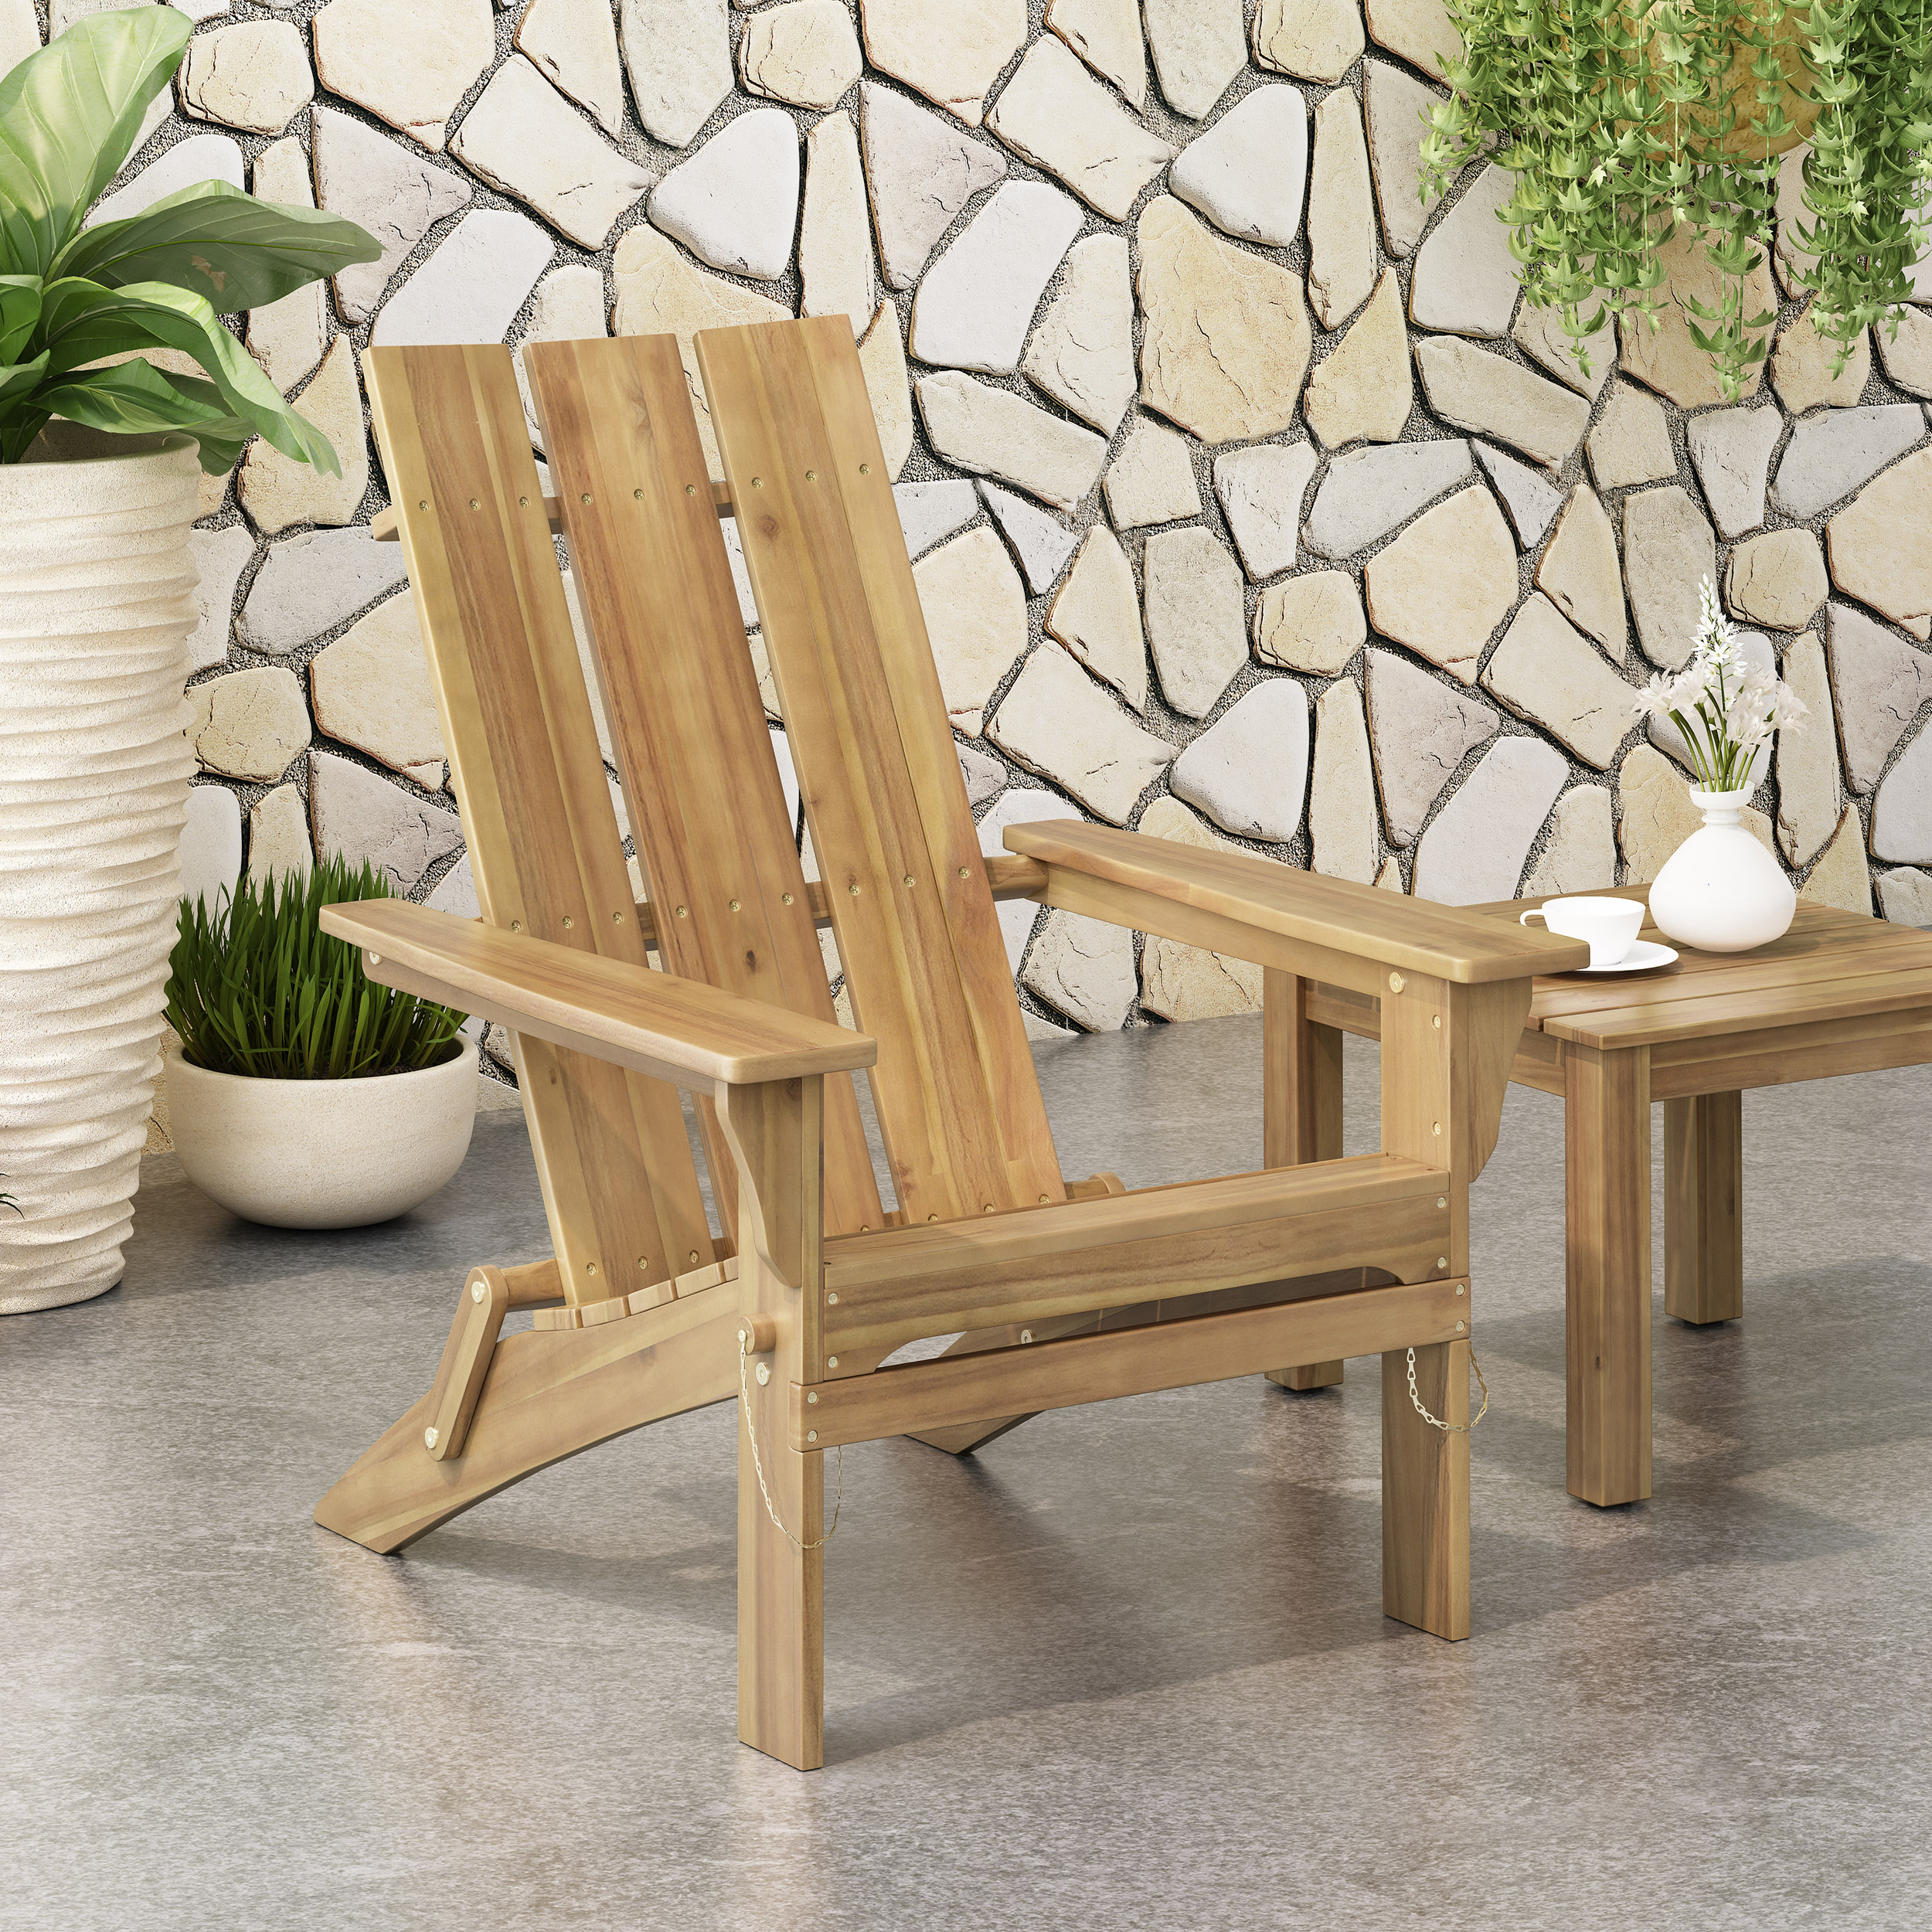 LANTRO JS Outdoor Classic Natural Color Solid Wood Adirondack Chair Garden Lounge Chair - image 2 of 5